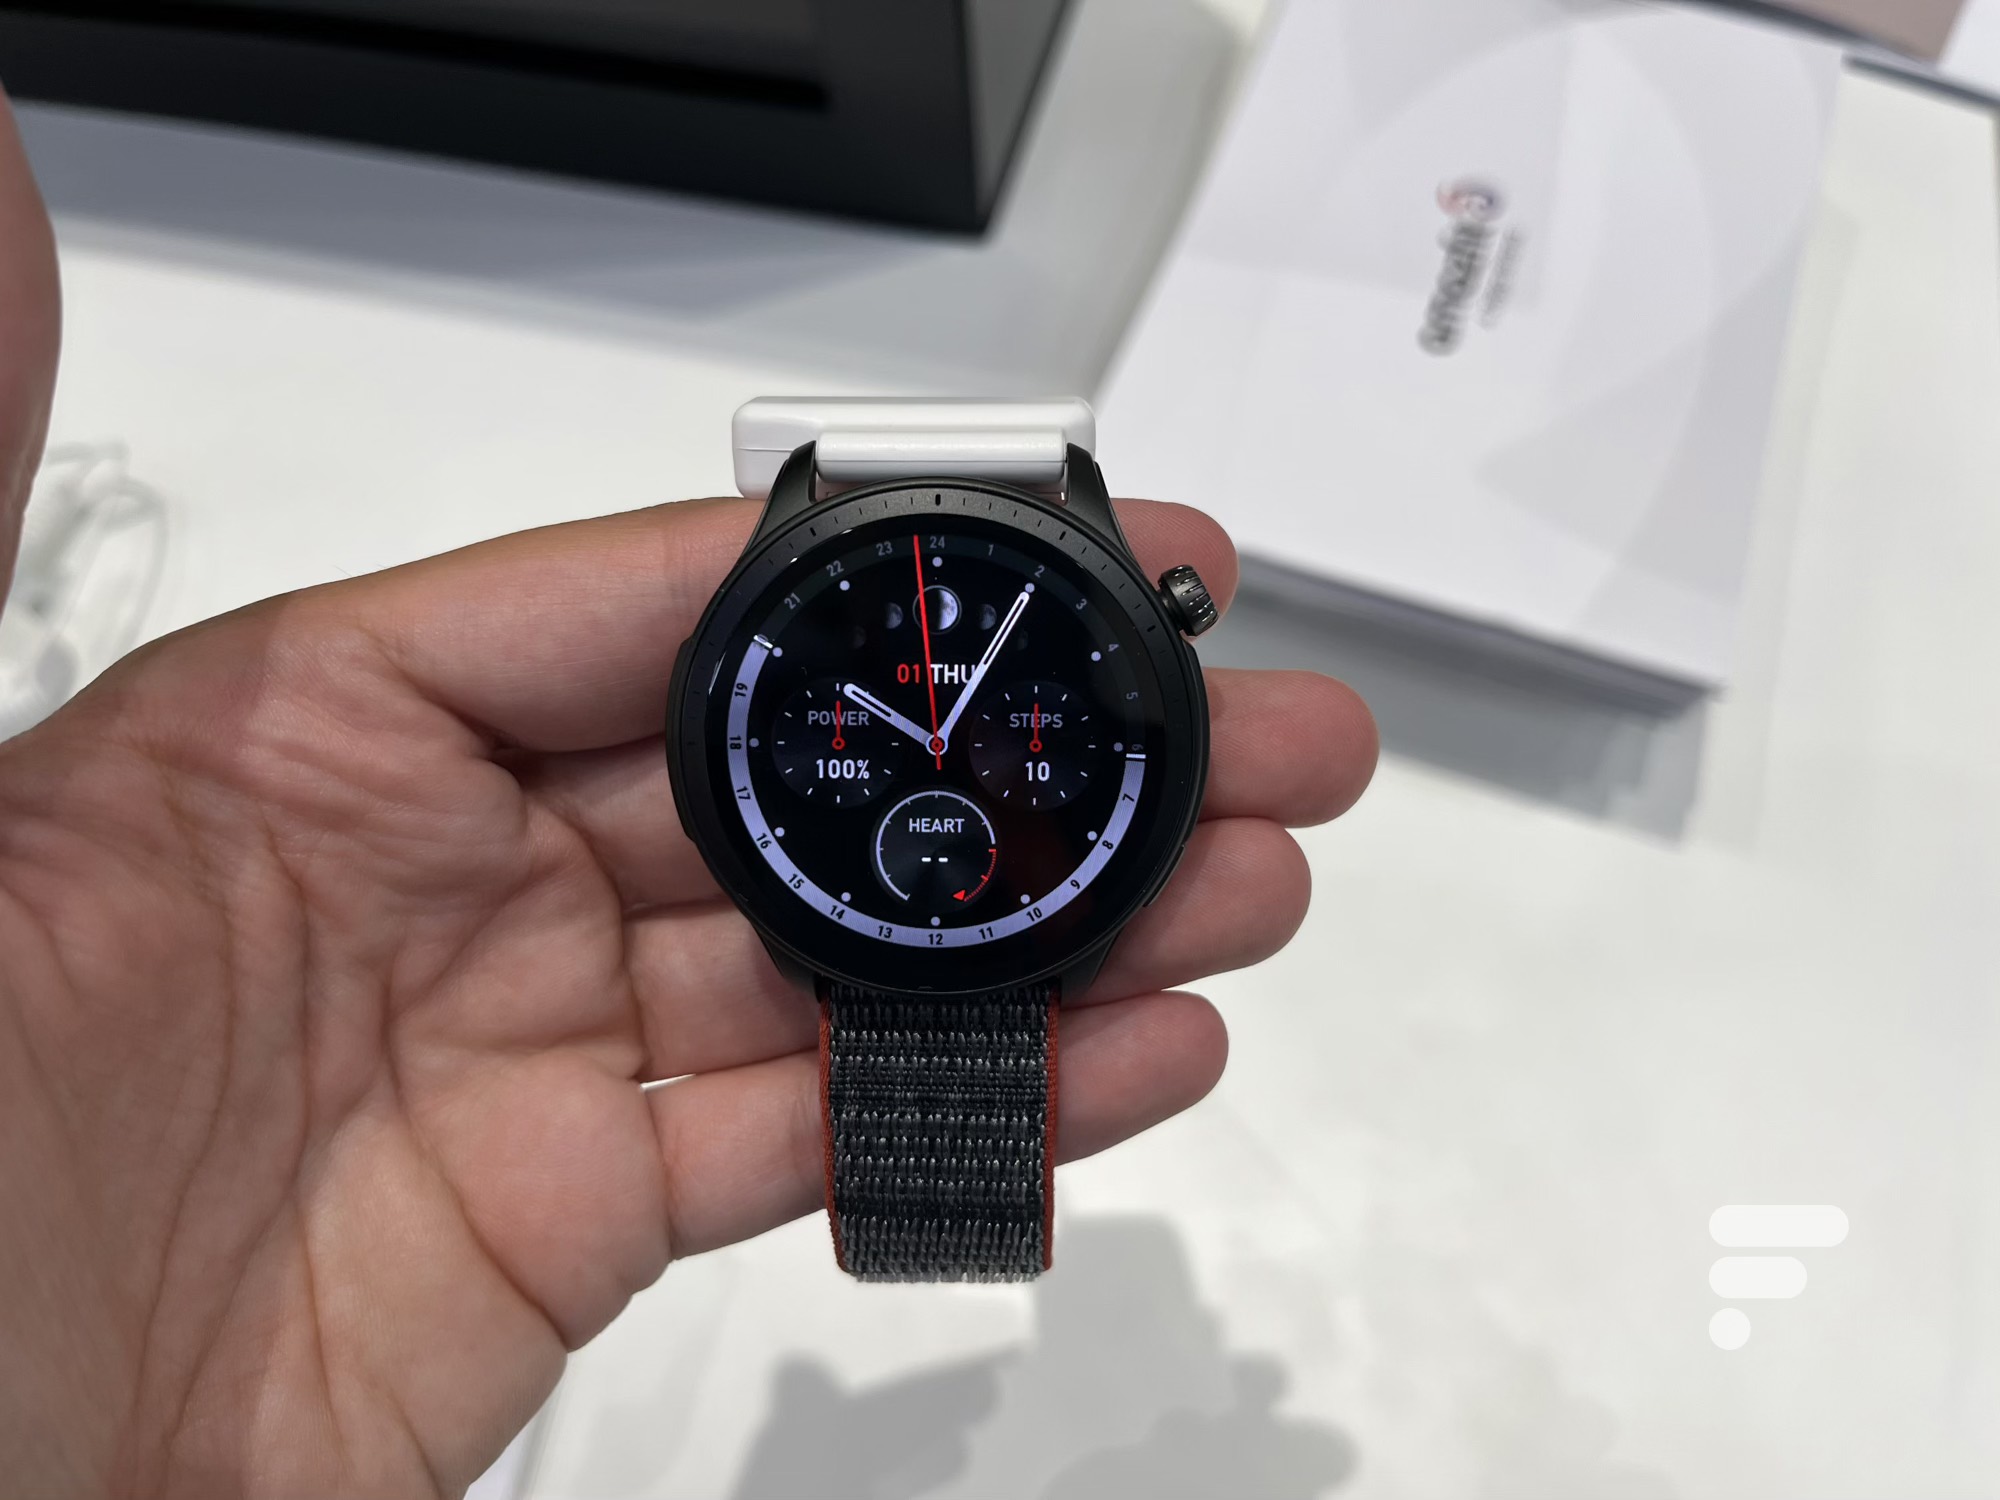 The price of the Amazfit GTR 4 has dropped by over 30% and is a bargain for a connected watch.